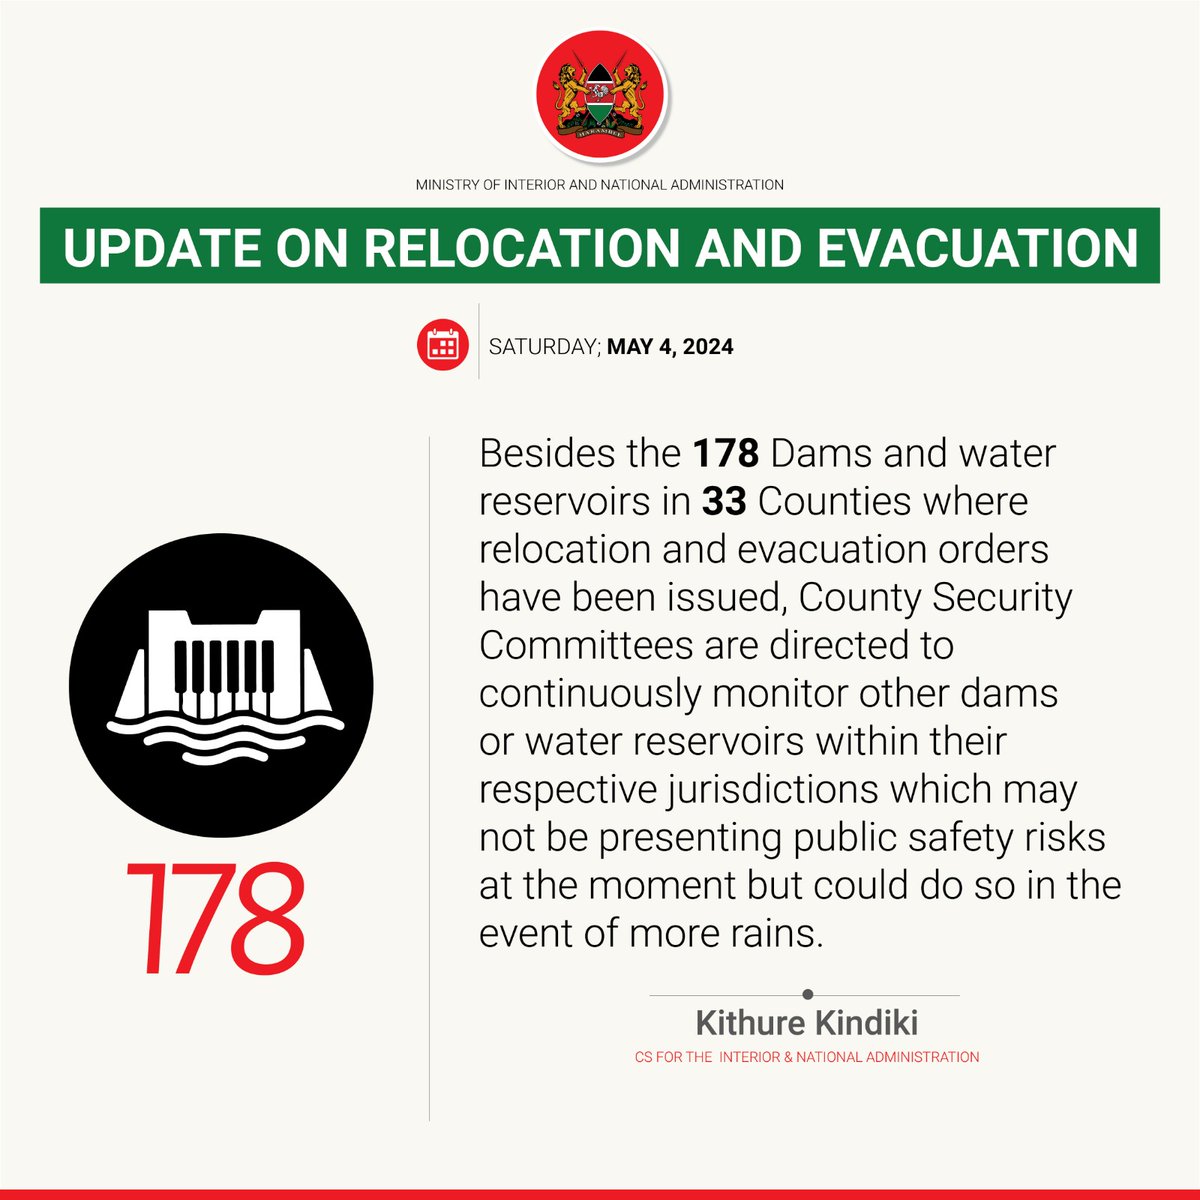 With a focus on dignity and compassion, Interior Cabinet Secretary Kithure Kindiki instructs security agencies to conduct relocations and evacuations in an orderly and humane manner, ensuring respect for the affected persons.

#MitigatingFloodsEffects